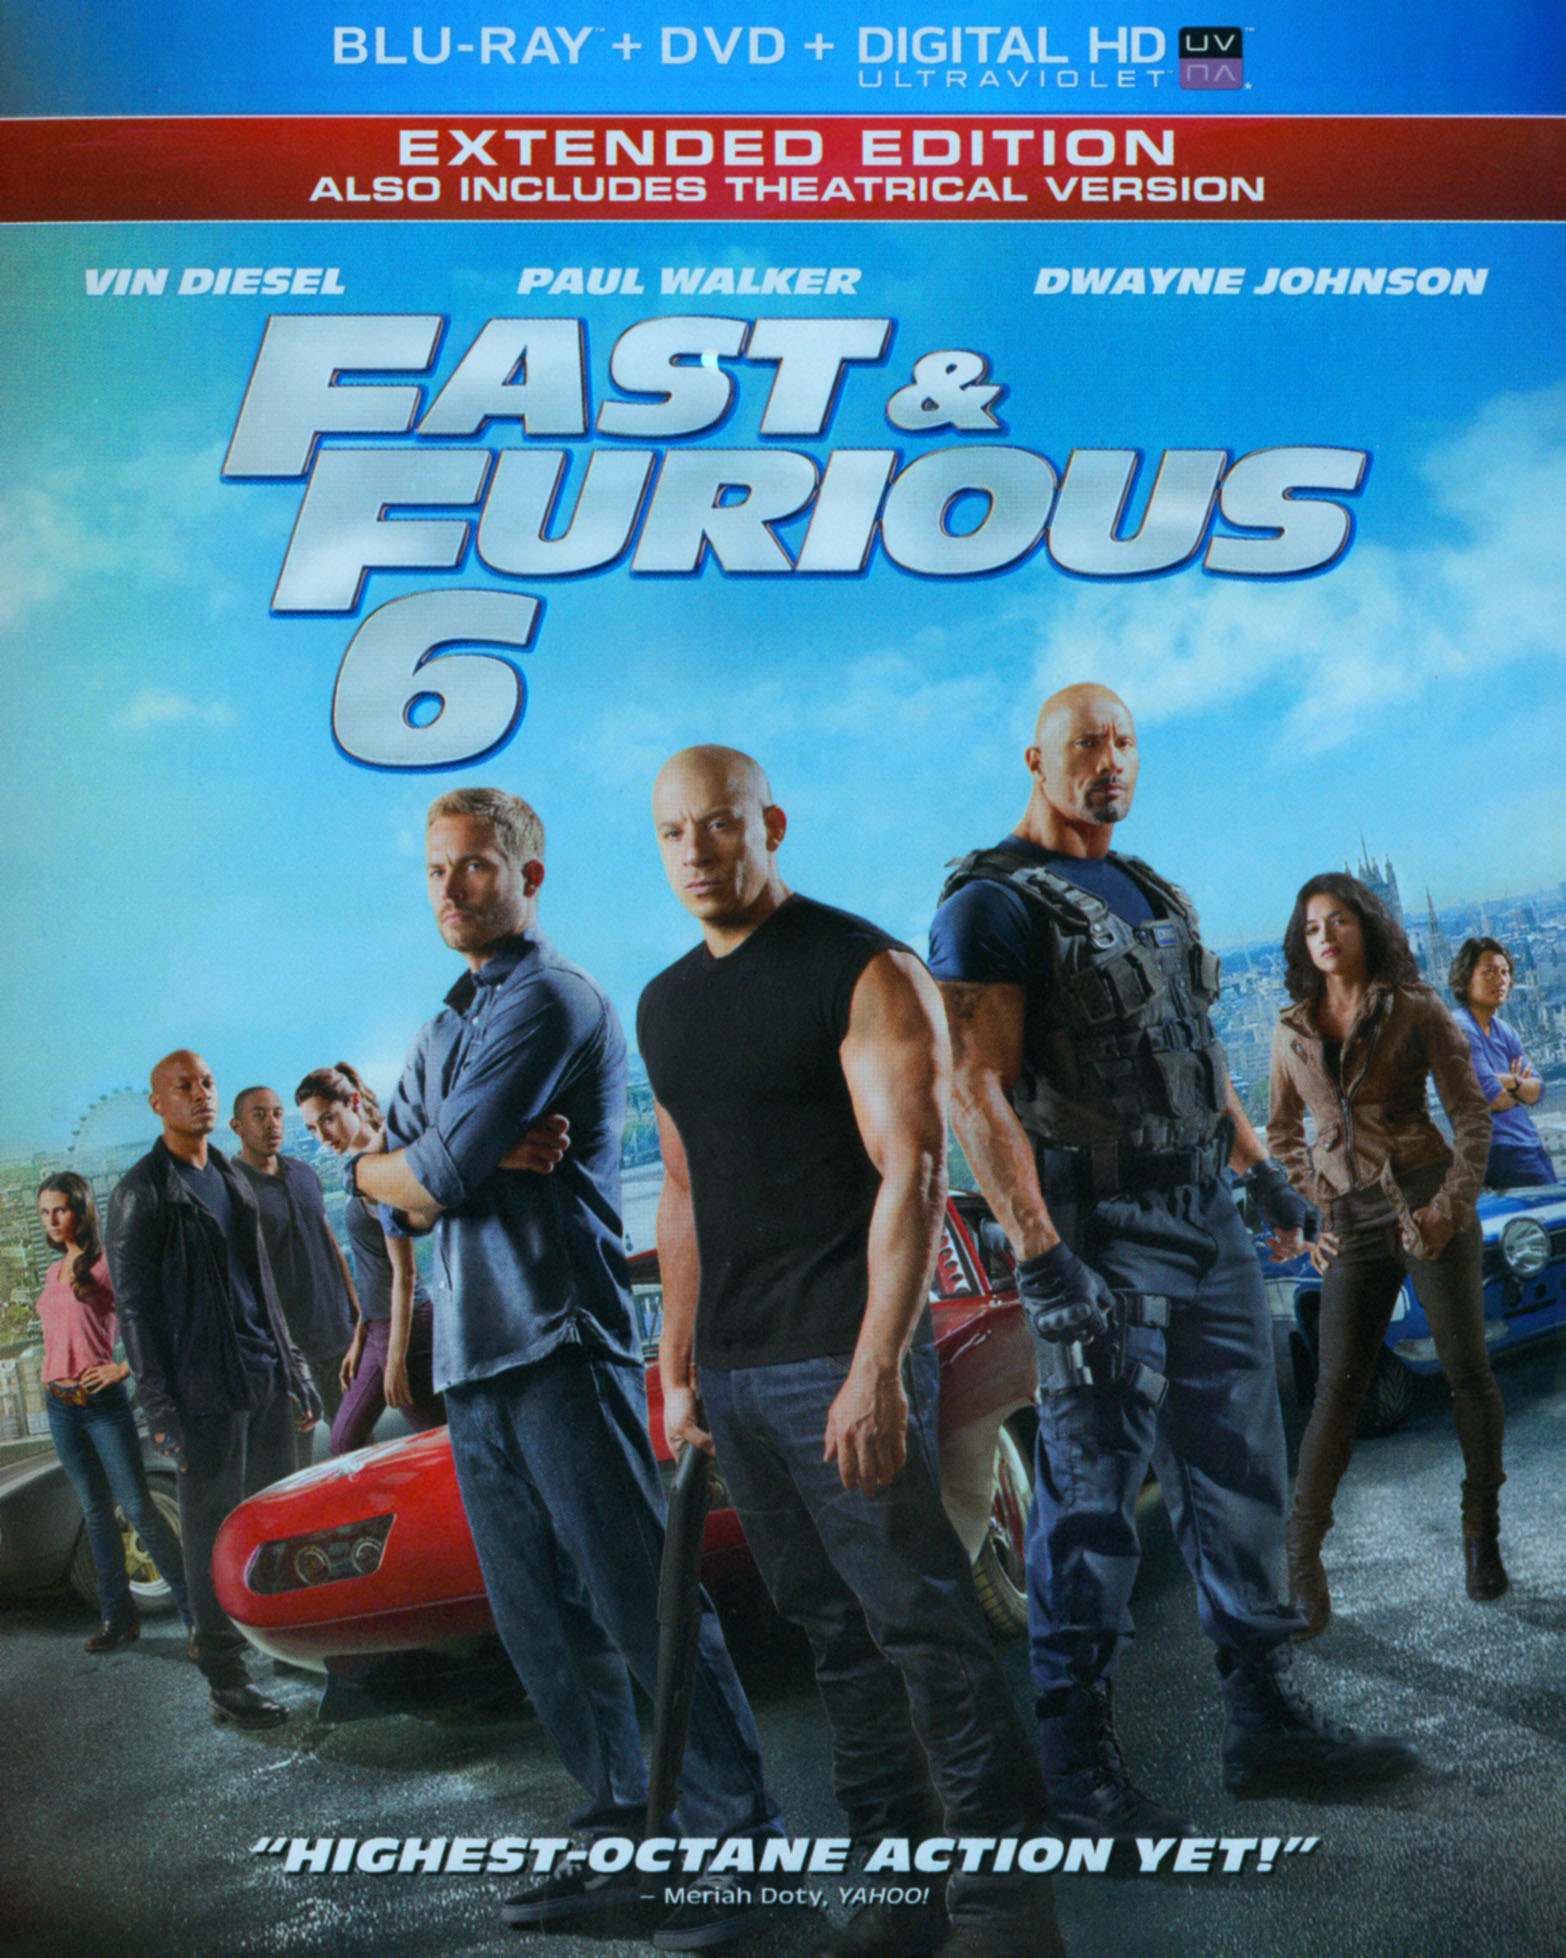 Fast and furious 6 full movie 1080p